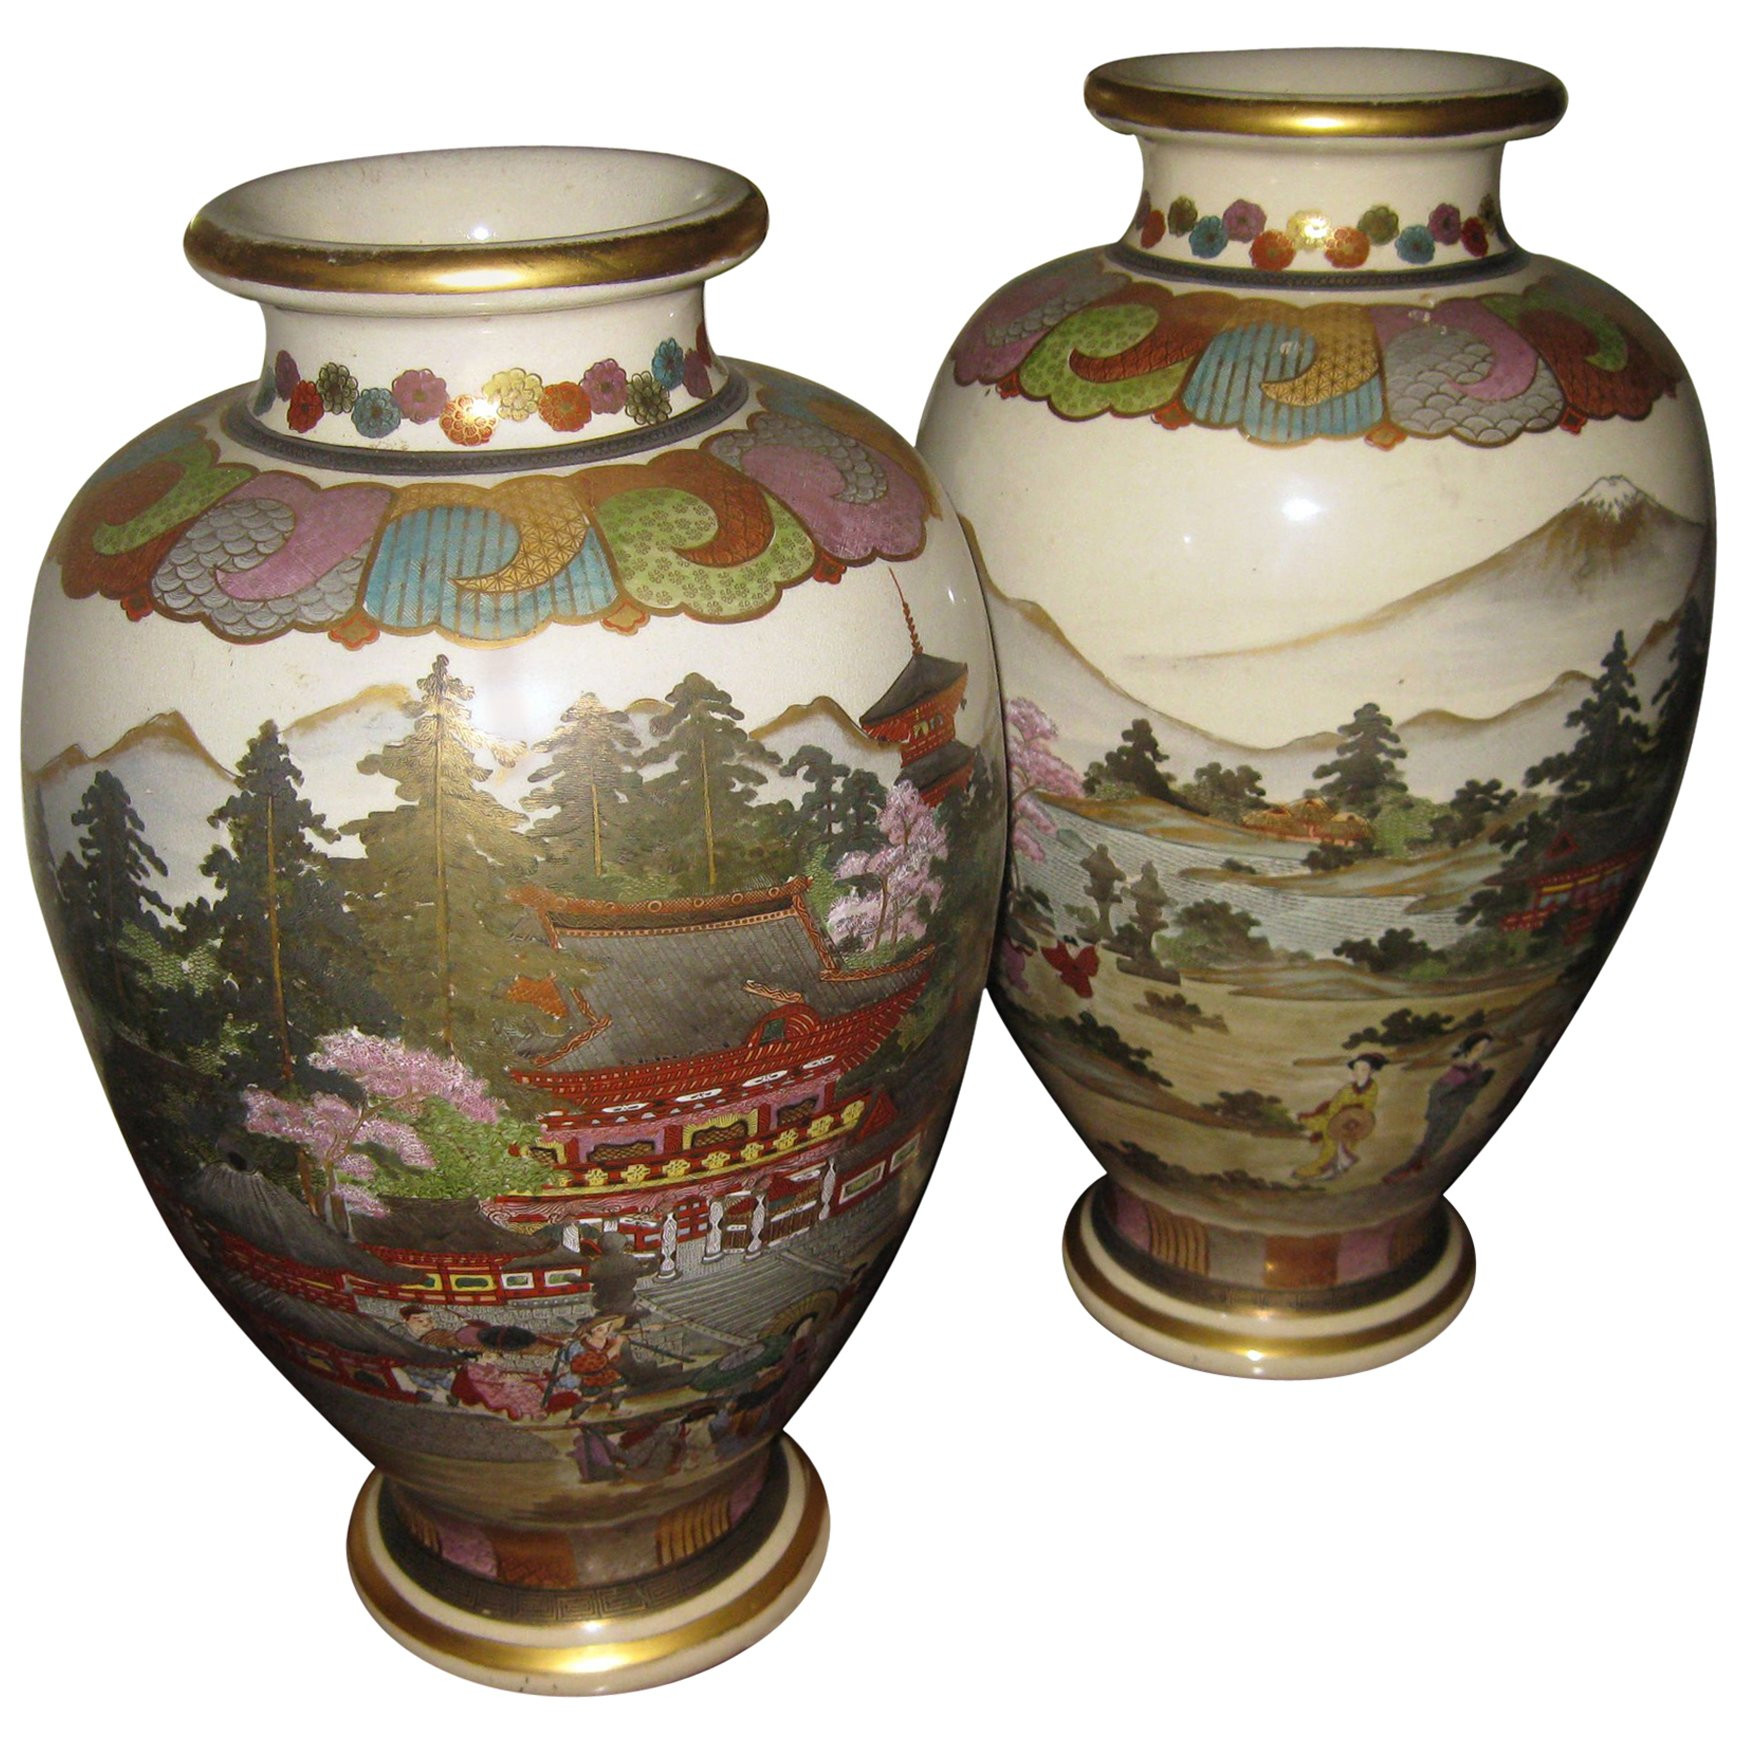 16 Recommended Satsuma China Vase 2024 free download satsuma china vase of early 20th century pair of japanese satsuma vases in painted ceramic with regard to early 20th century pair of japanese satsuma vases in painted ceramic for sale at 1st